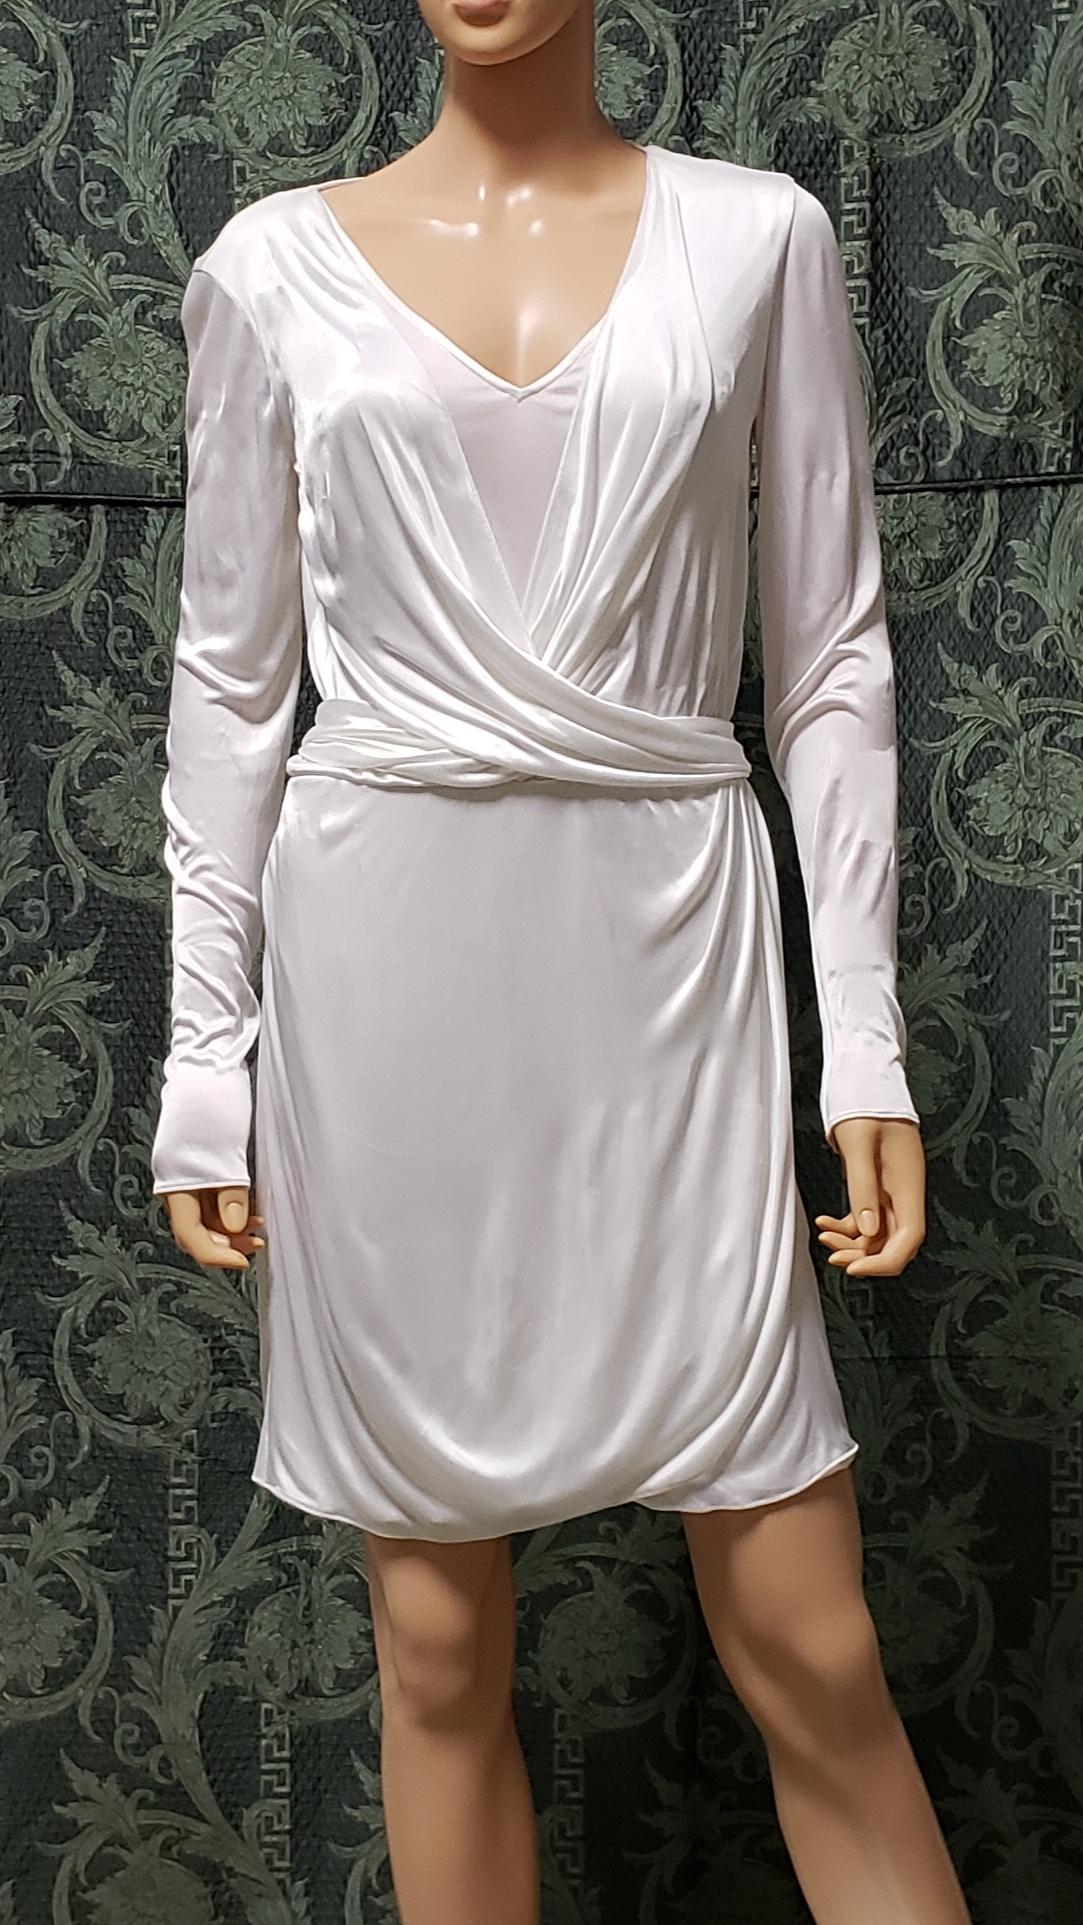 VERSACE

Delicate pearl white mini dress

This dress has long sleeves

Content: 100% viscose
lining: 100% viscose

trim: 100% silk


IT Size 42 - US 6

shoulder to shoulder 16 1/2